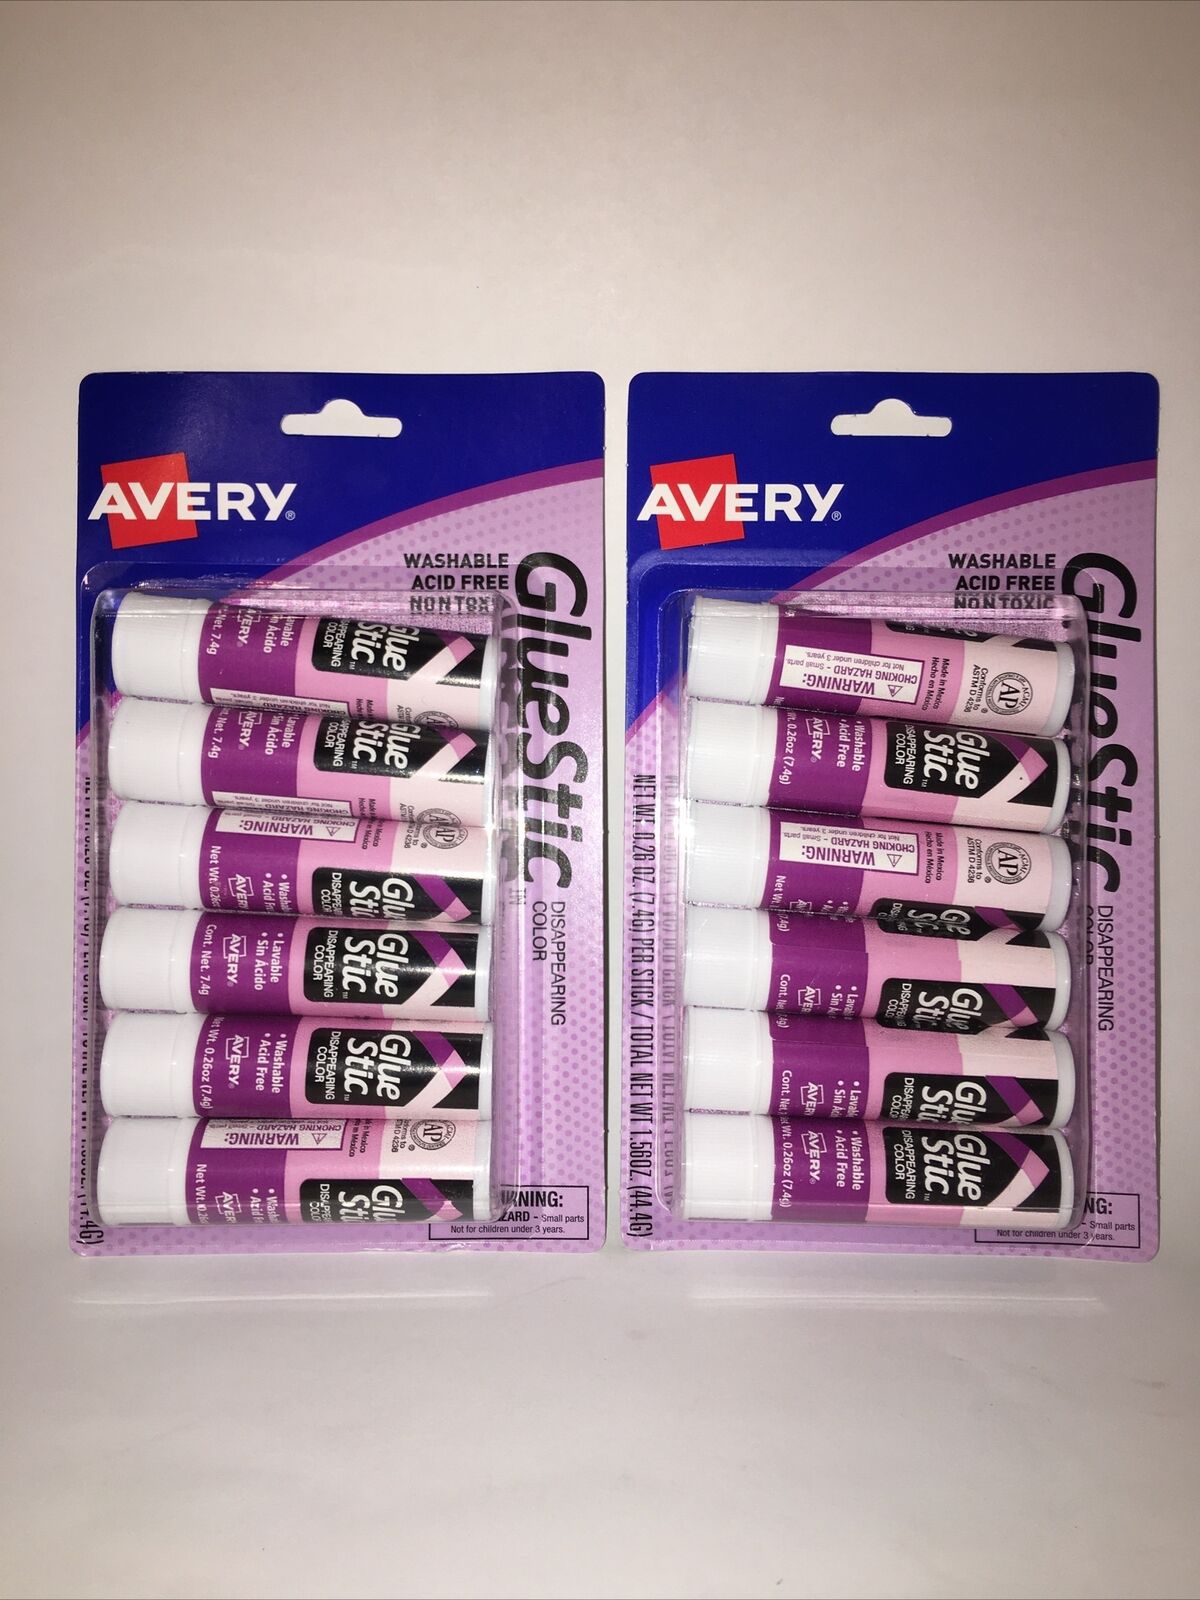 Glue Stick Avery Disappearing Color Washable 0.26 oz. Acid free